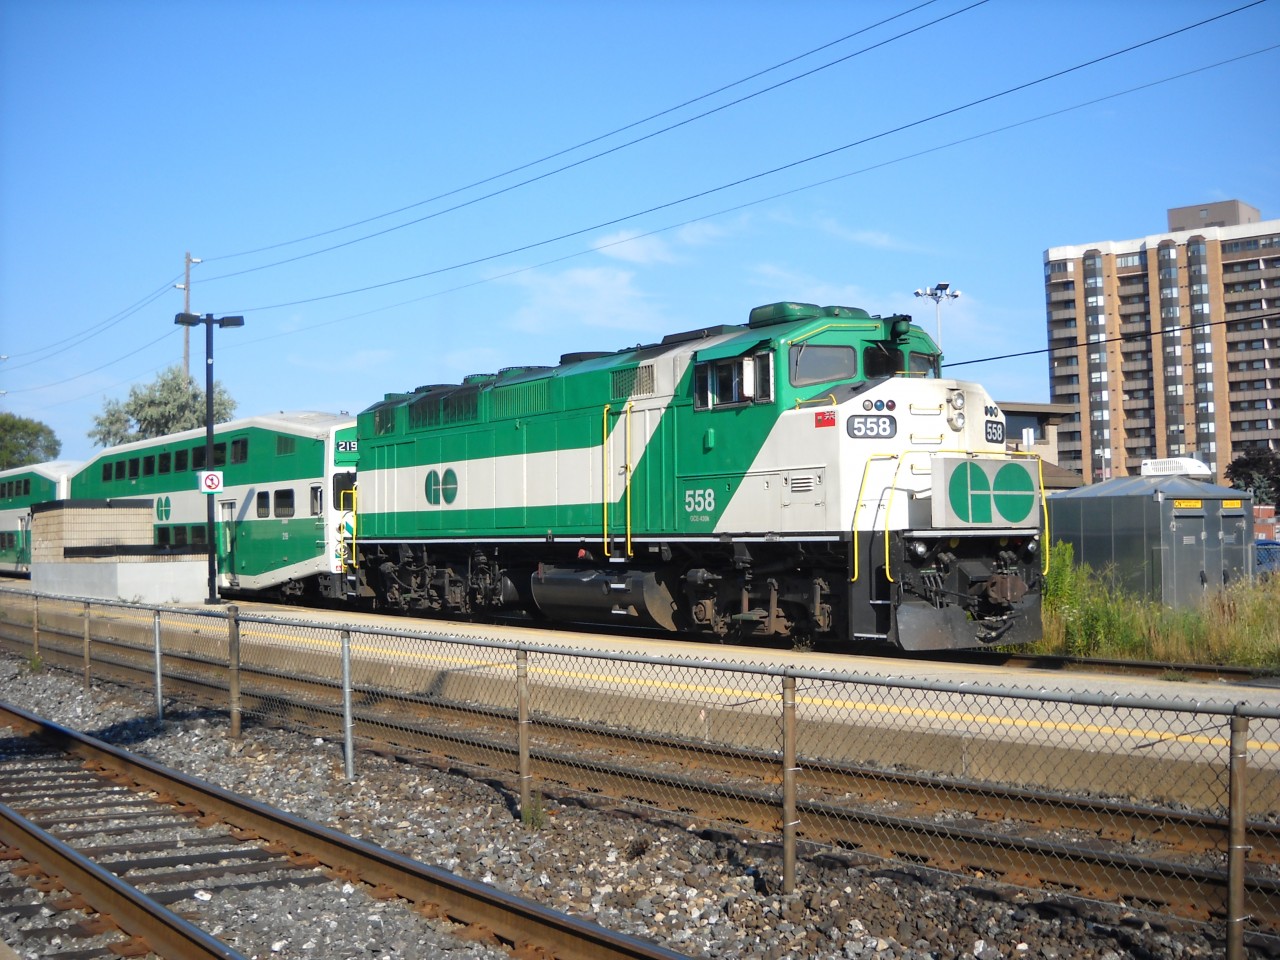  RevEd Photo: GO F59PH #558 is pushing an eastbound GO  train out of Long Branch station on the evening of August 18th 2013. #558  is operating at the end of